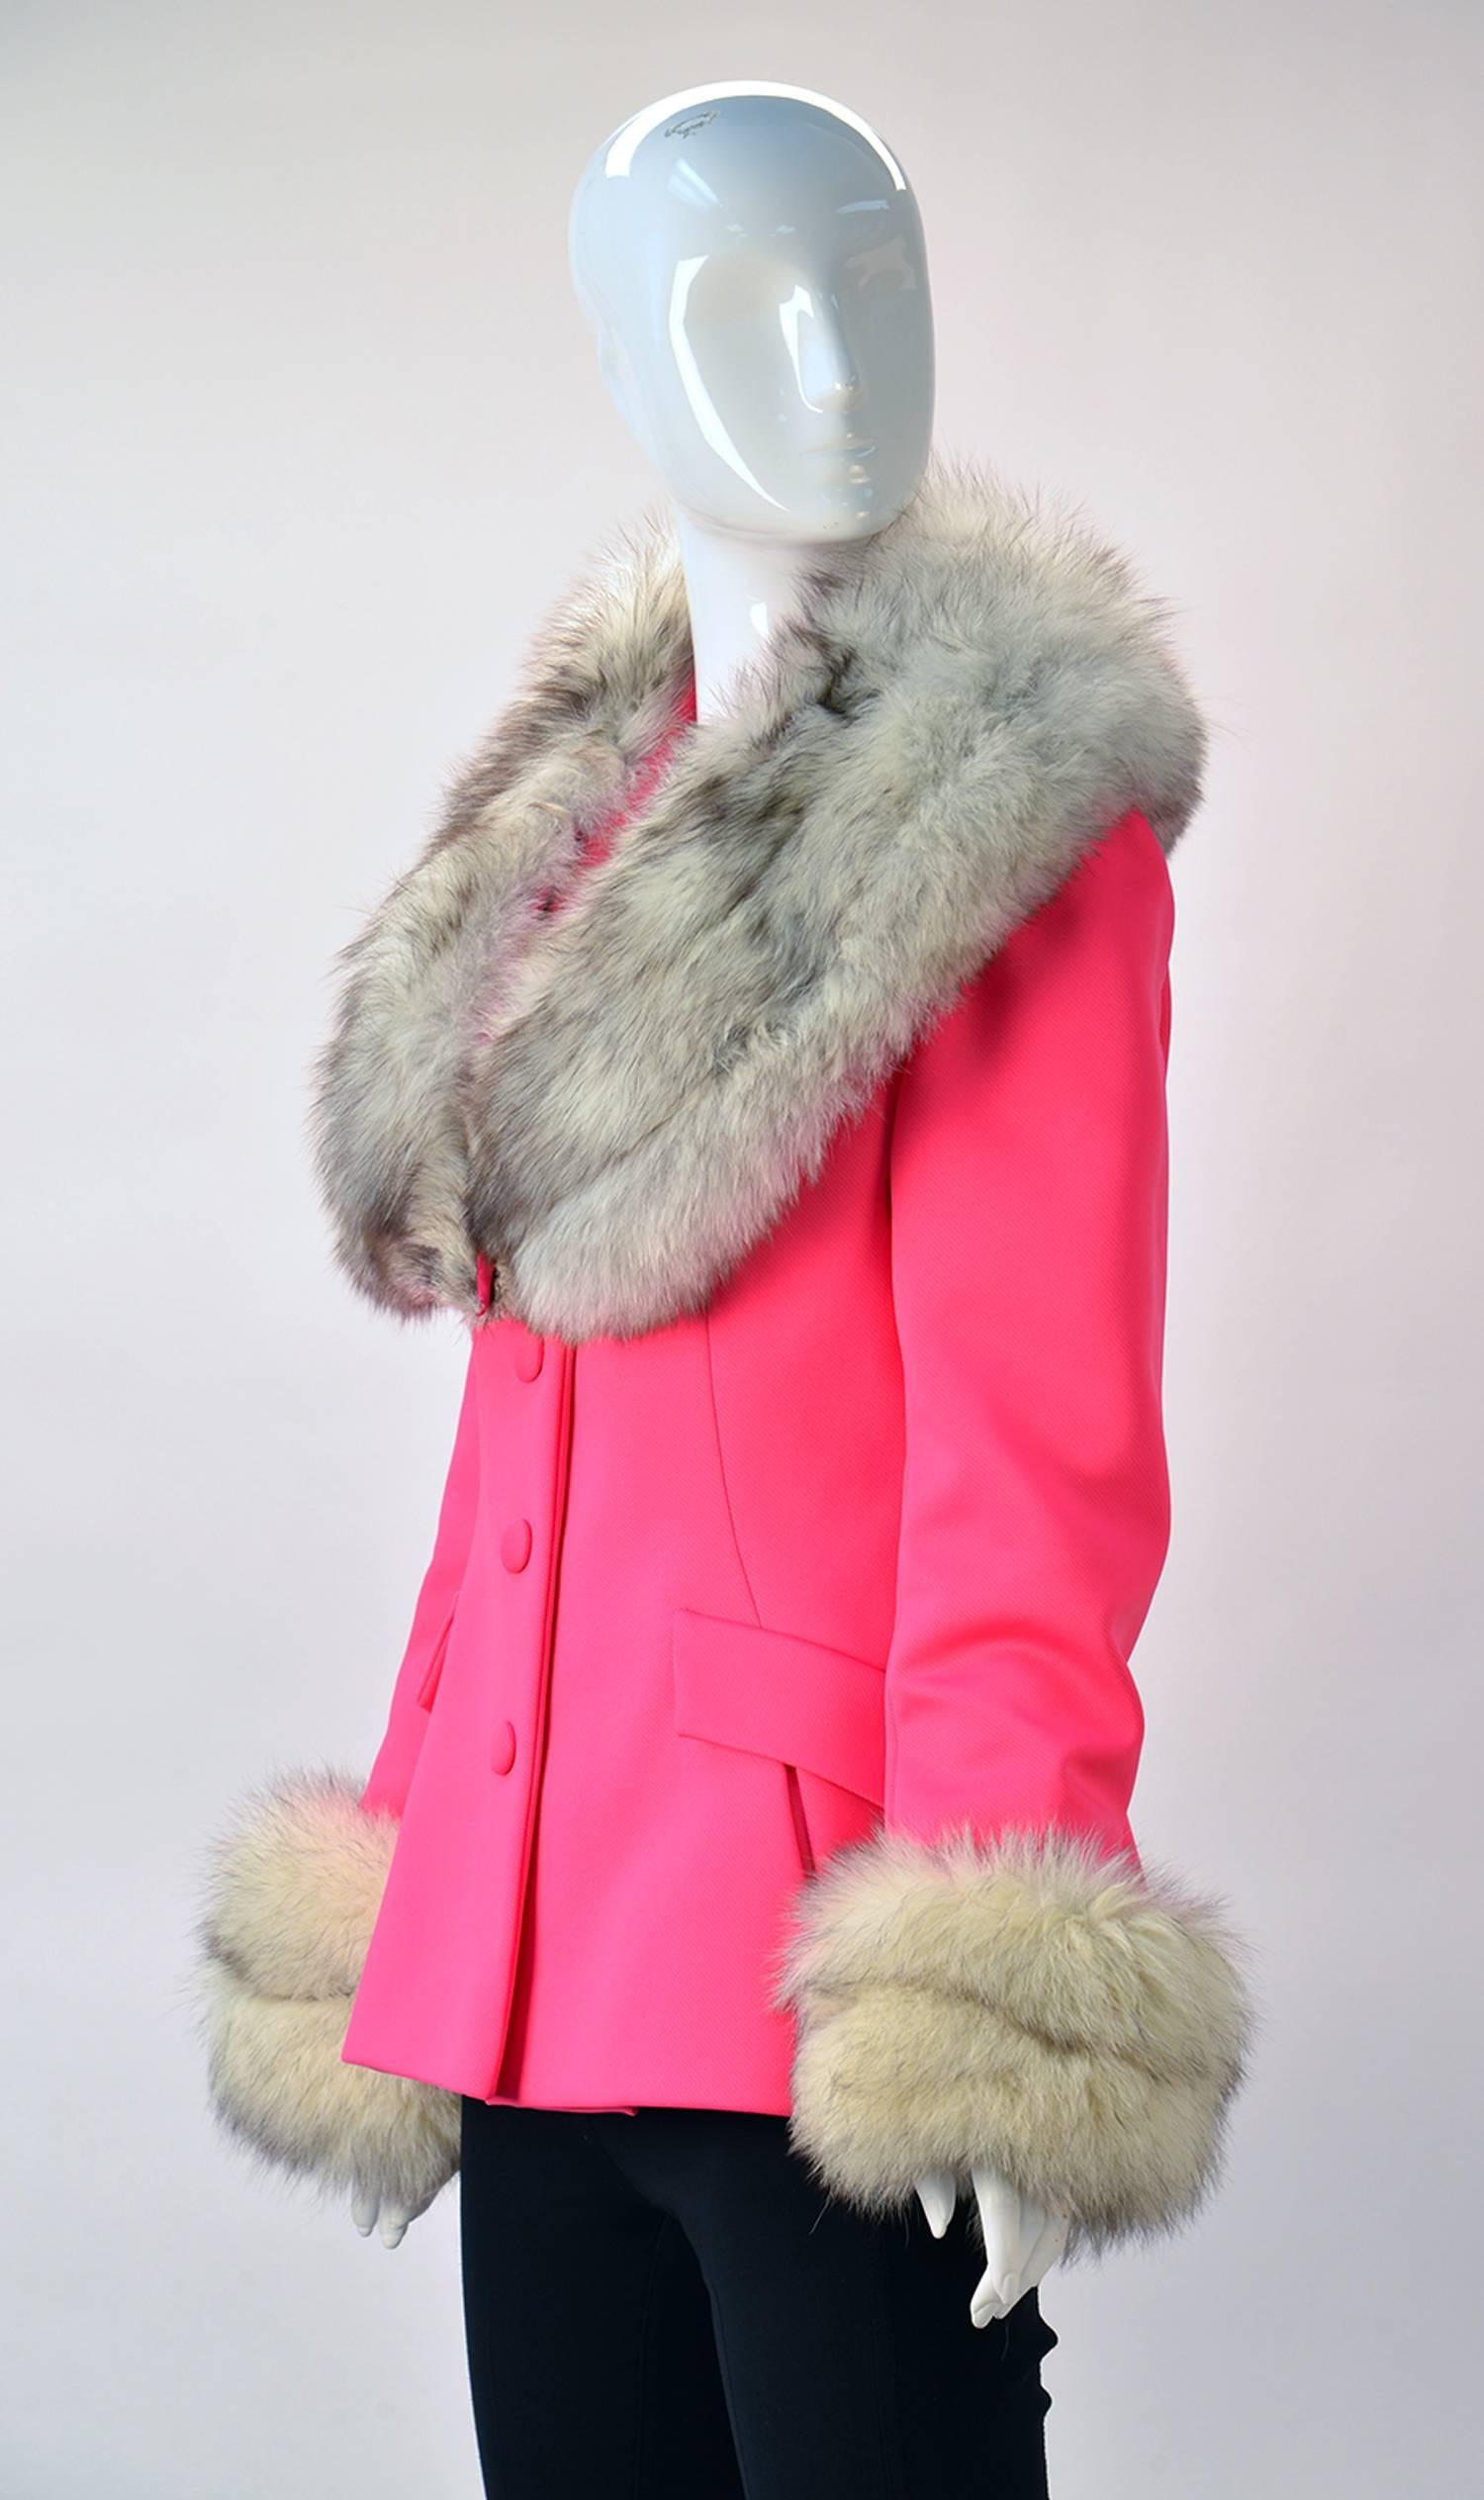 
Fantastic for a cold Sring day comes this 1960's Lilli Ann pink jacket with large fox fur collar and cuffs. The jacket features princess seams, with Spanish snap button holes. Faux pockets with flaps. There is a snap to close the fur. The back of